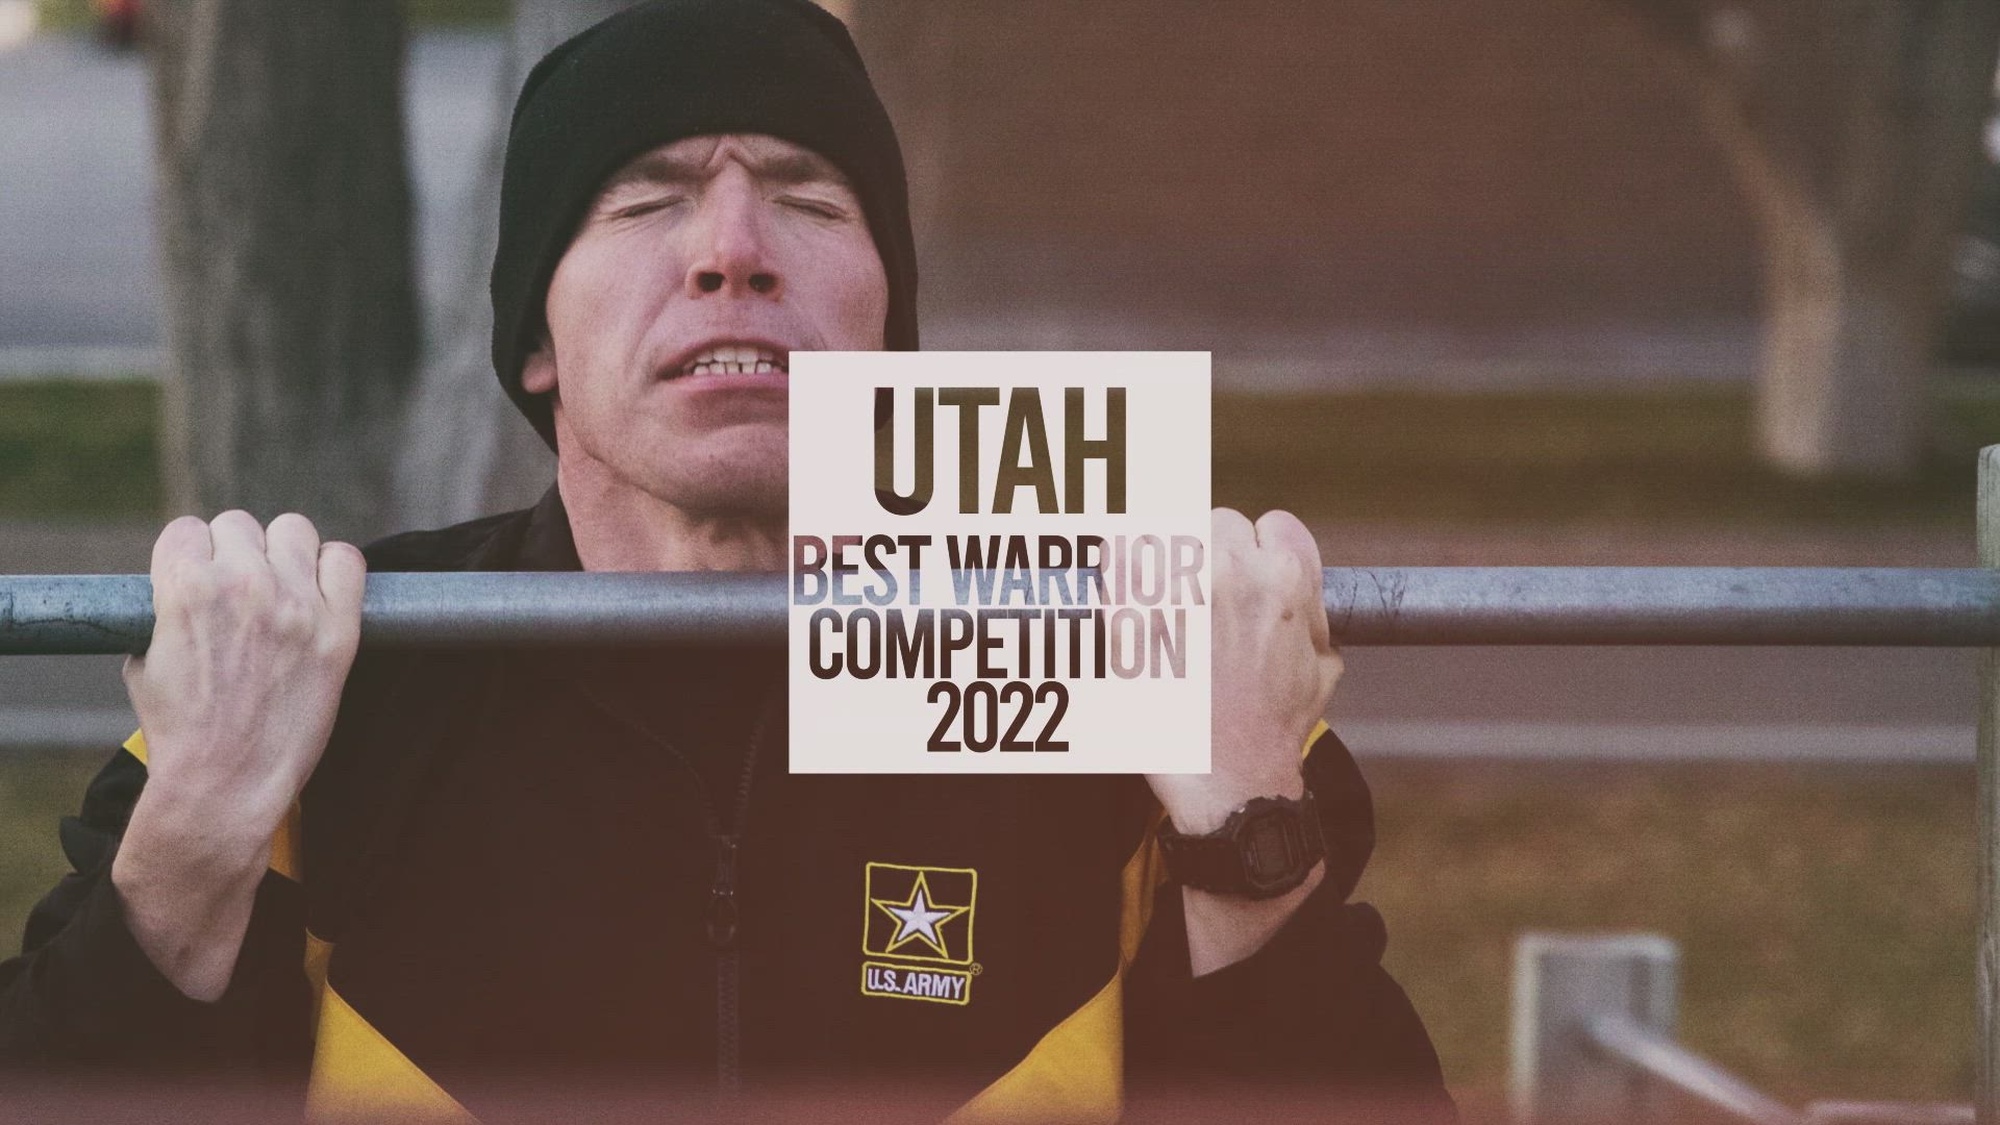 Soldiers from all corners of Utah convened on Camp Williams to see who will win the title of "Best Warrior 2022". The tasks tested the competitors mentally, physically, and emotionally.